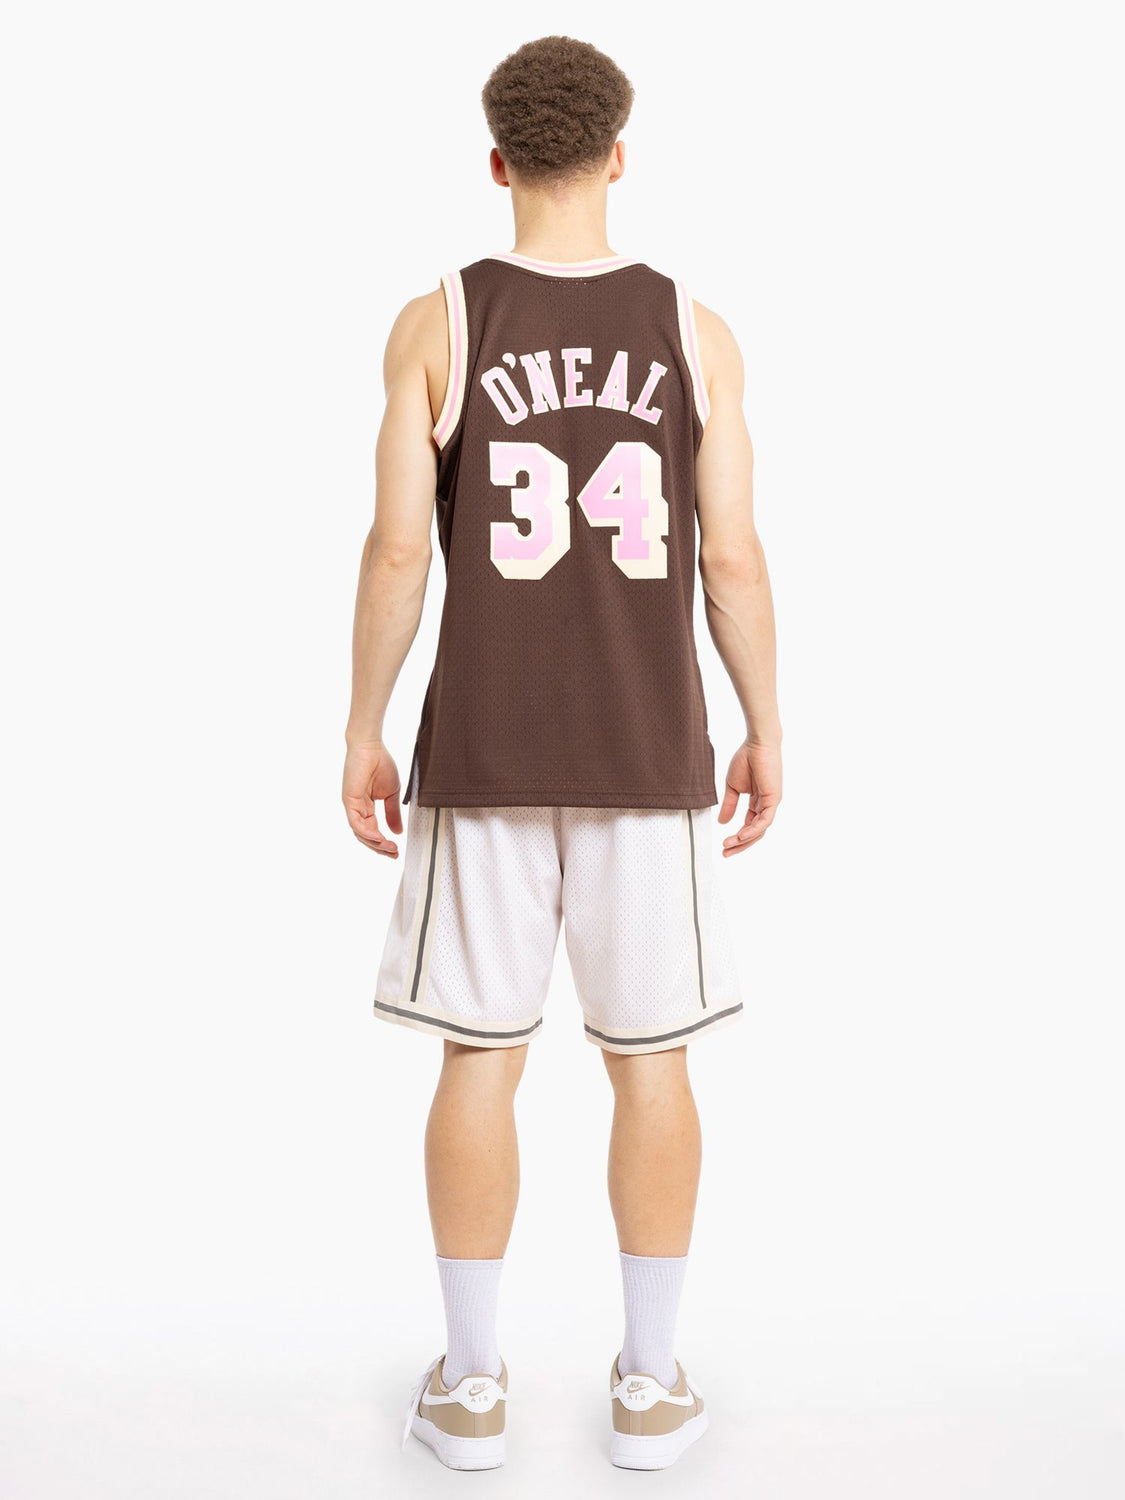 Source Scottie Pippen White Best Quality Stitched Basketball Jersey on  m.